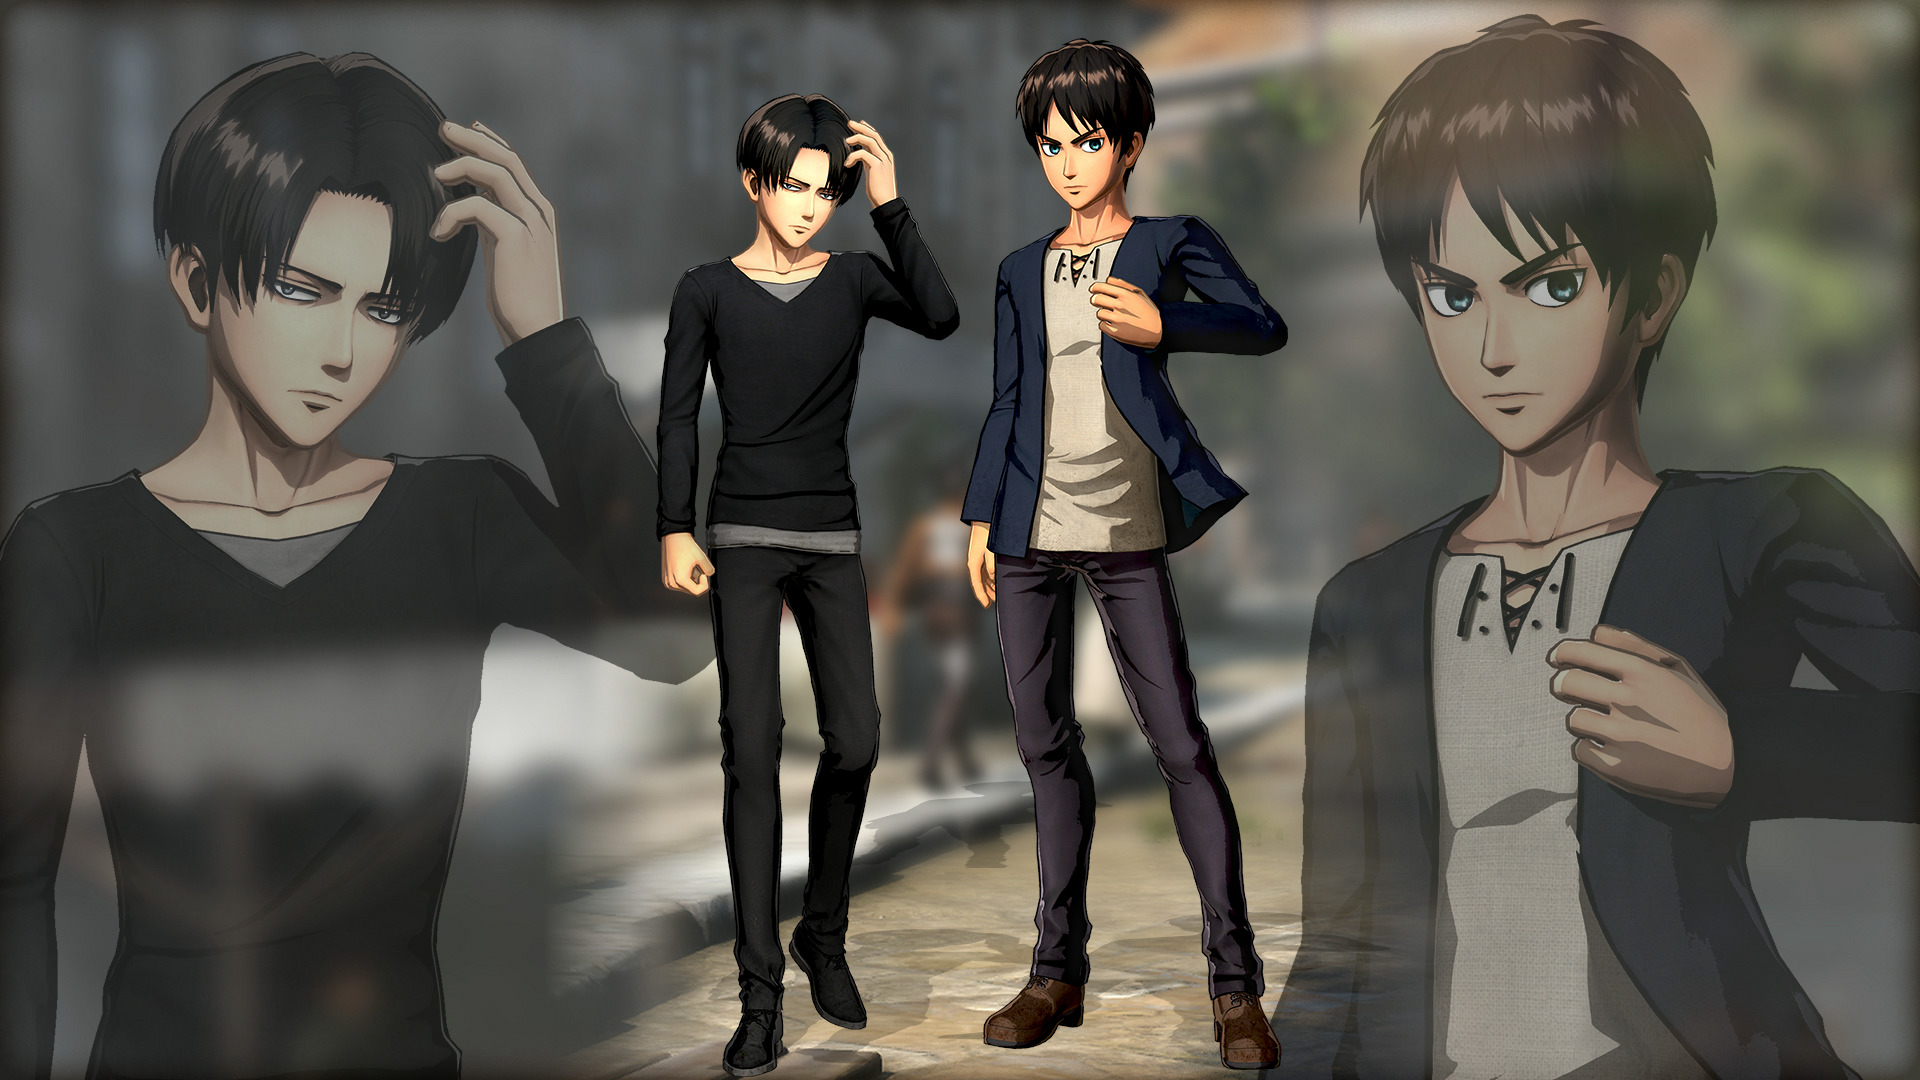 Attack on Titan 2: Eren & Levi "Plain clothes" Outfit Early Release